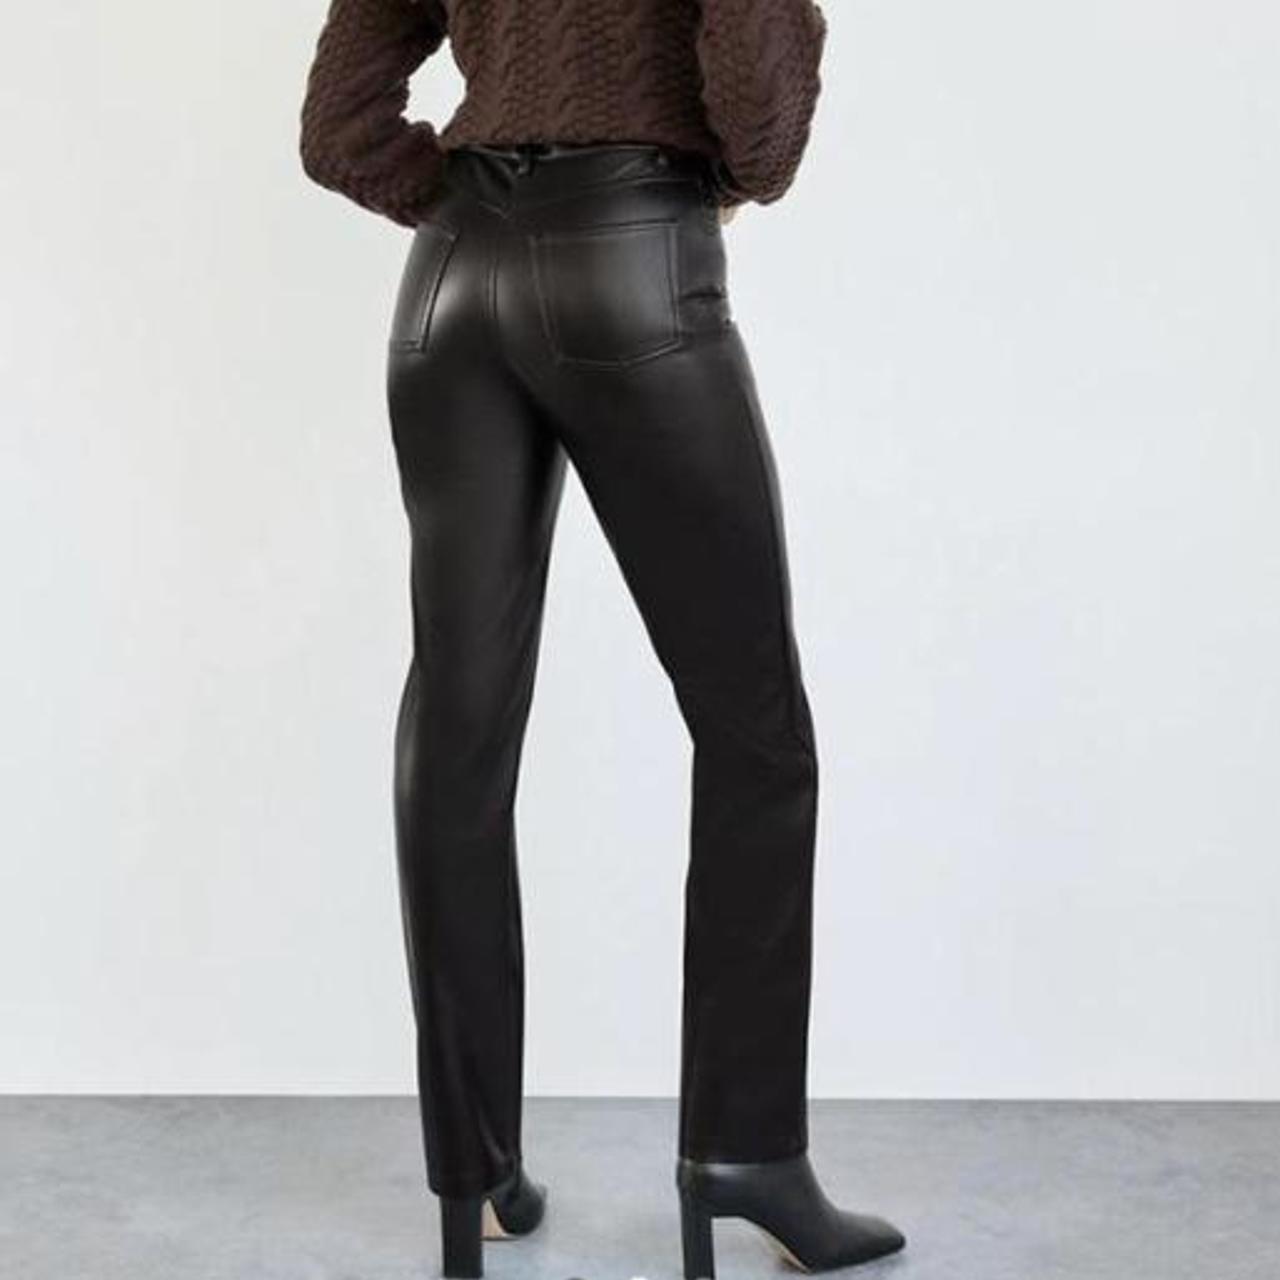 Product Image 1 - Aritzia Wilfred “Melina” Pants

Black buttery